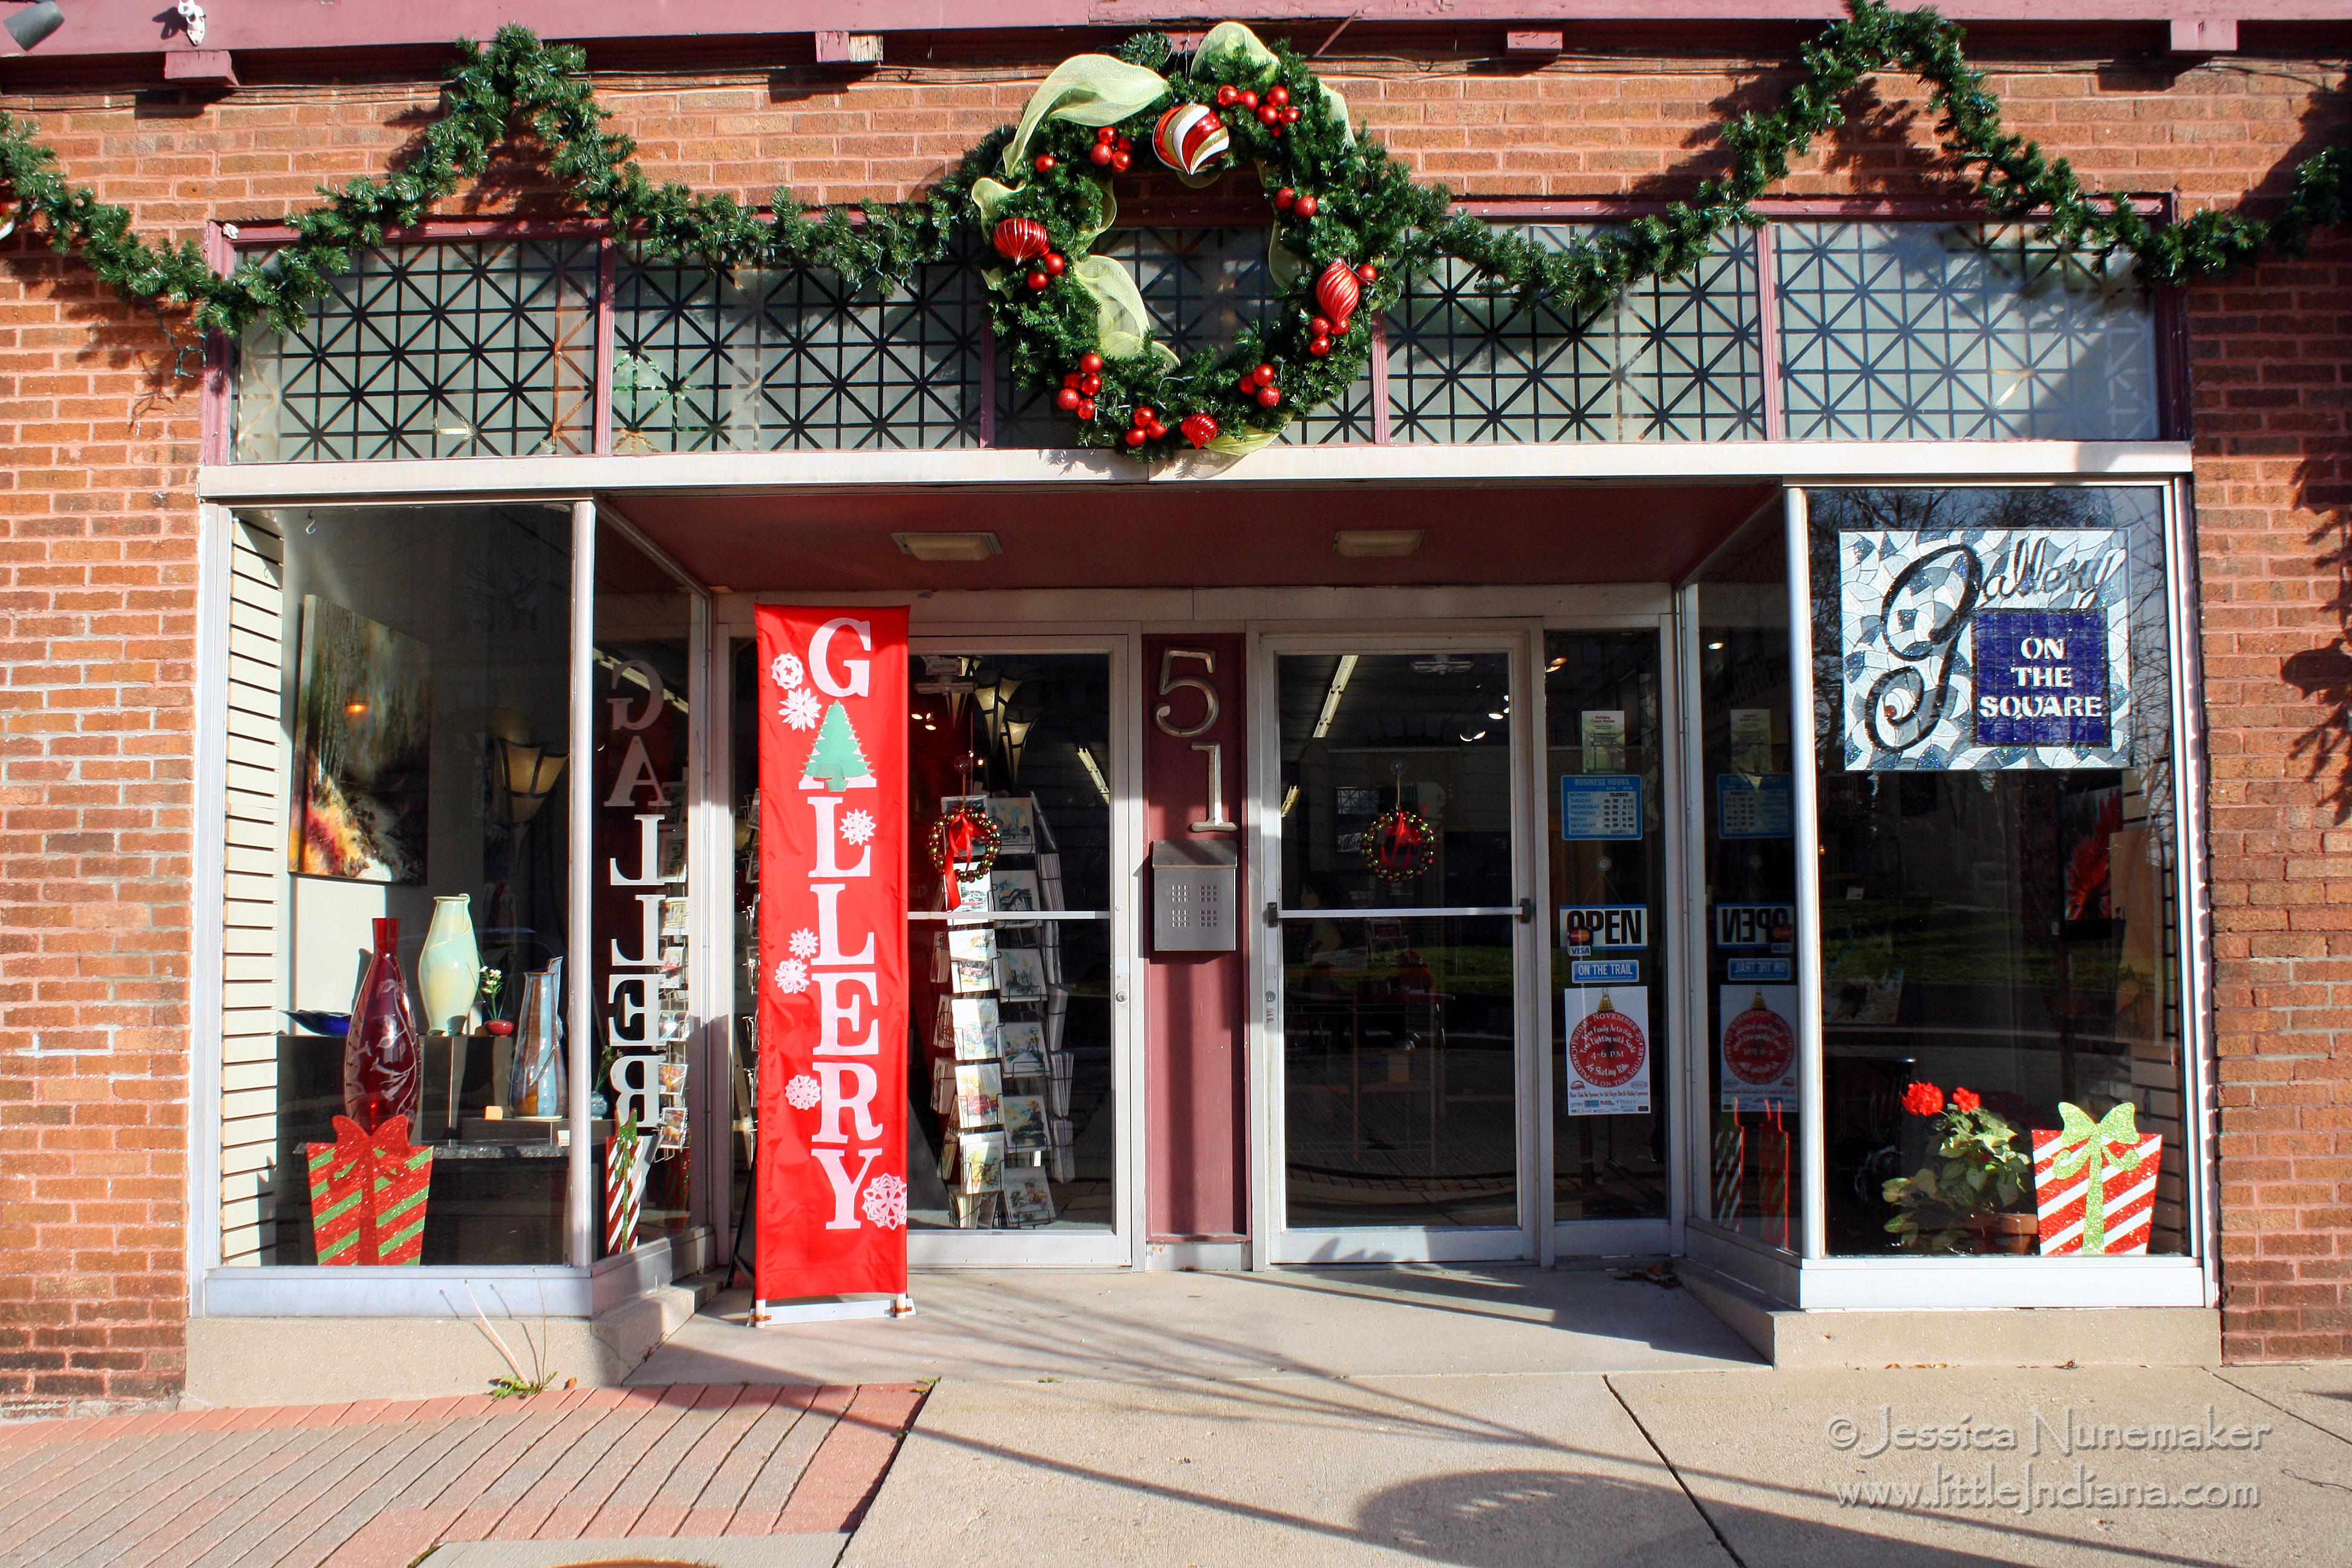 Gallery on the Square: Danville, Indiana